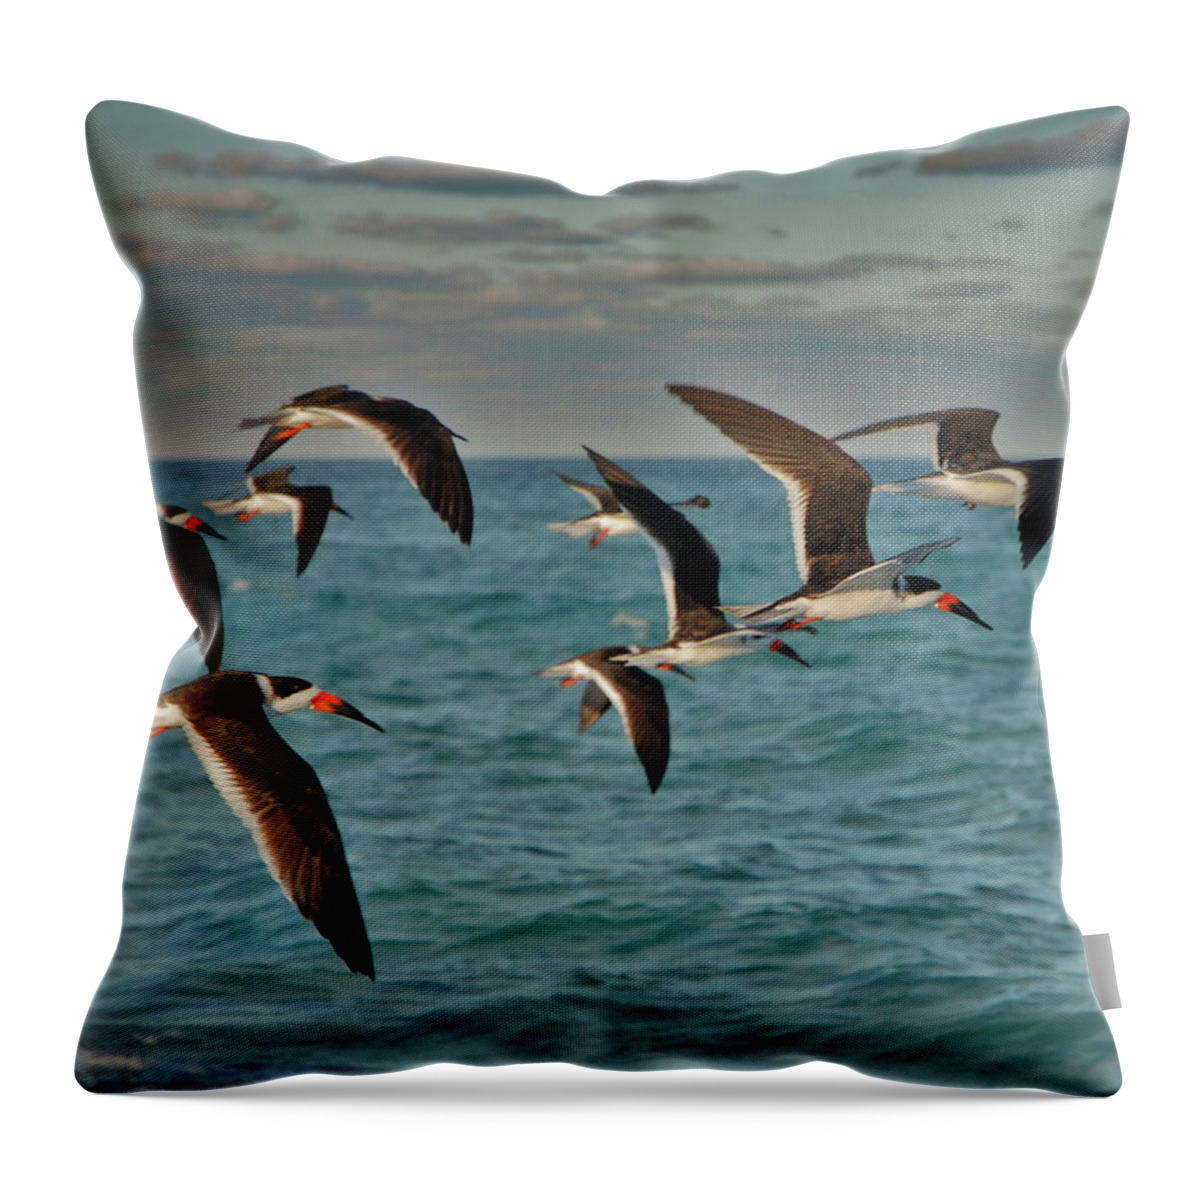 Black Skimmers Throw Pillow featuring the photograph 1- Black Skimmers by Joseph Keane